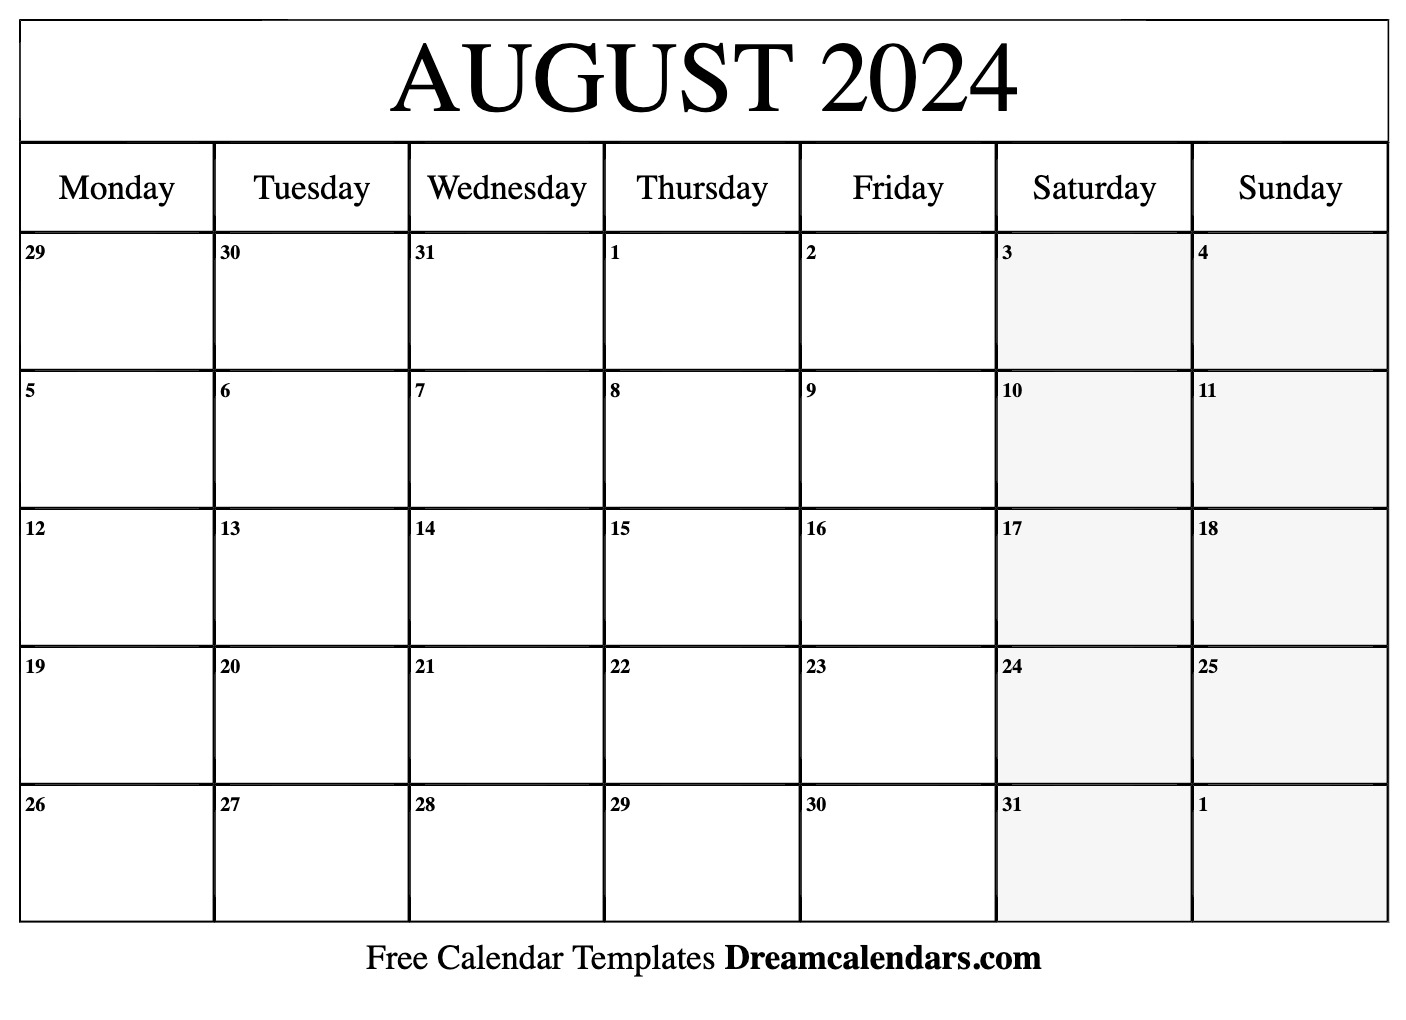 August 2024 Calendar | Free Blank Printable With Holidays for Free Printable Calendar August 2024